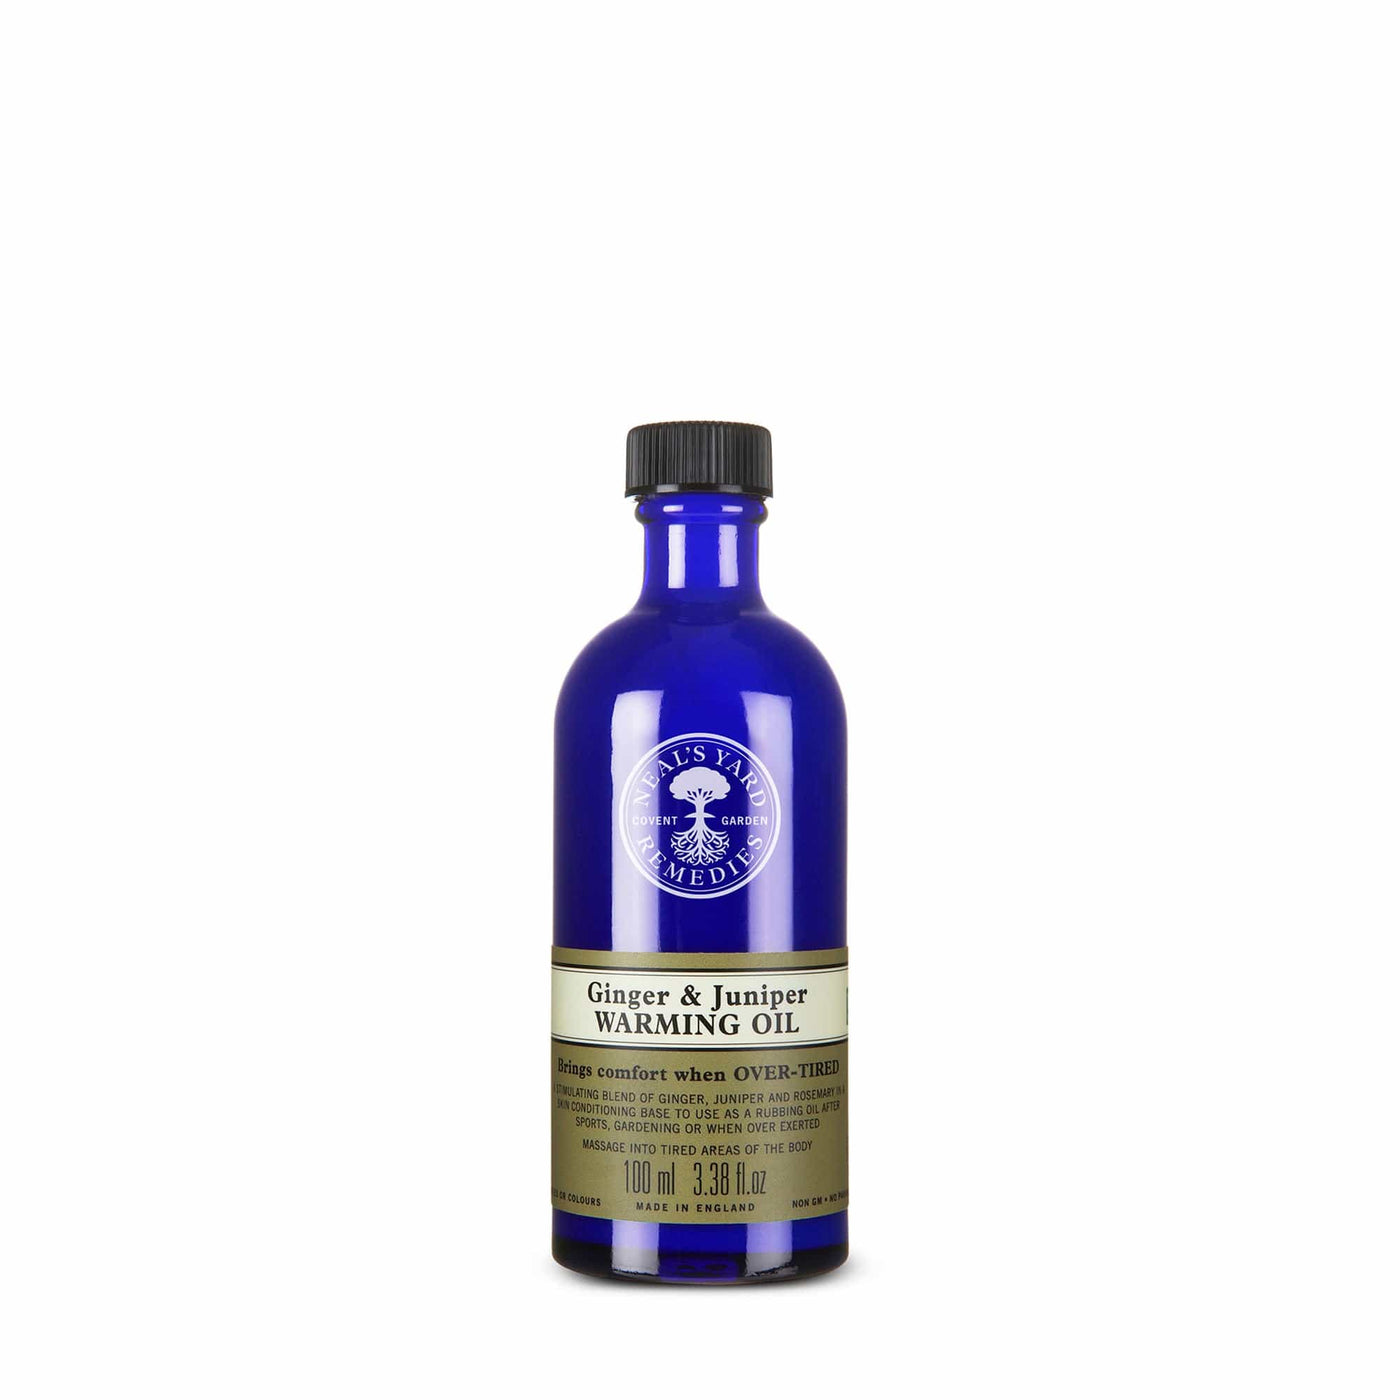 Neal's Yard Remedies Ginger and Juniper Warming Oil 100ml